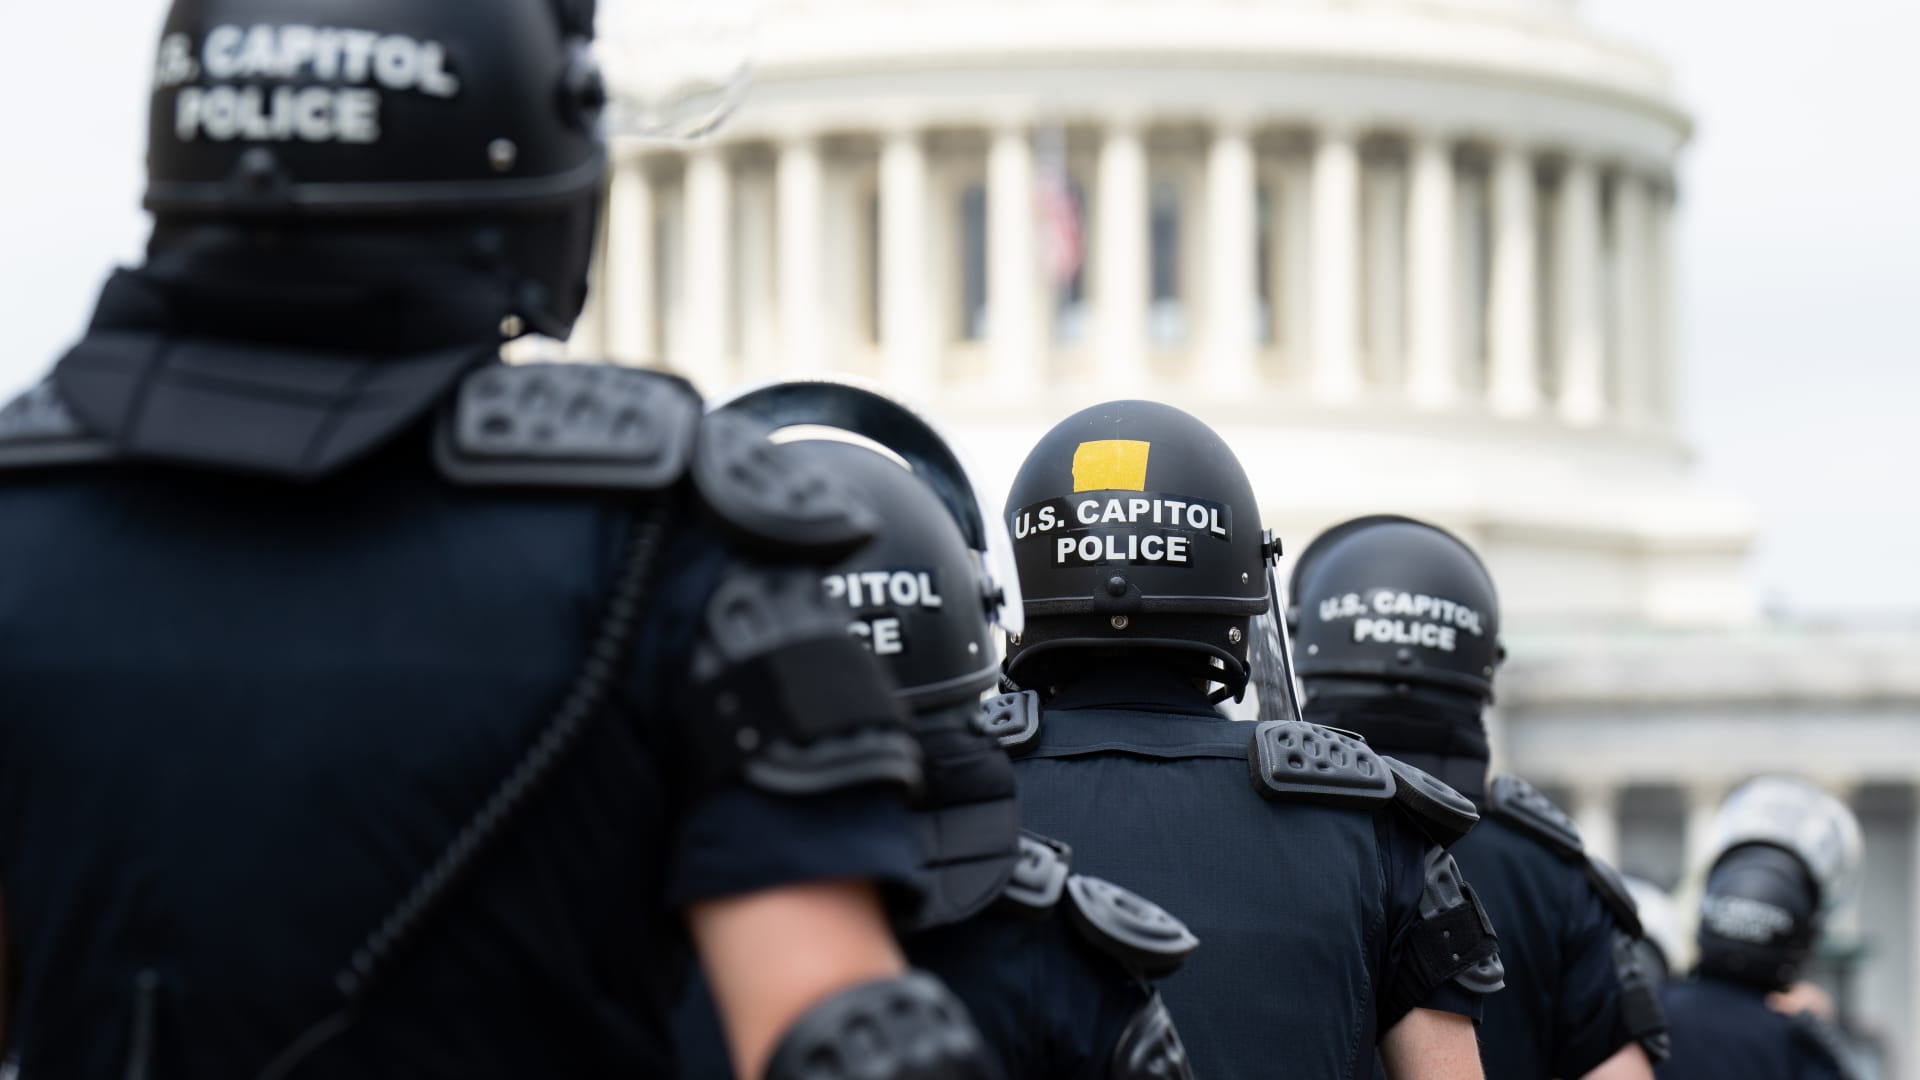 U.S. Capitol Police in riot gear return to their staging area after clear a path back to the Capitol for House Democrats after they spoke in front of the Supreme Court following the Dobbs v Jackson Womens Health Organization decision overturning Roe v Wade was handed down at the U.S. Supreme Court on Friday, June 24, 2022.